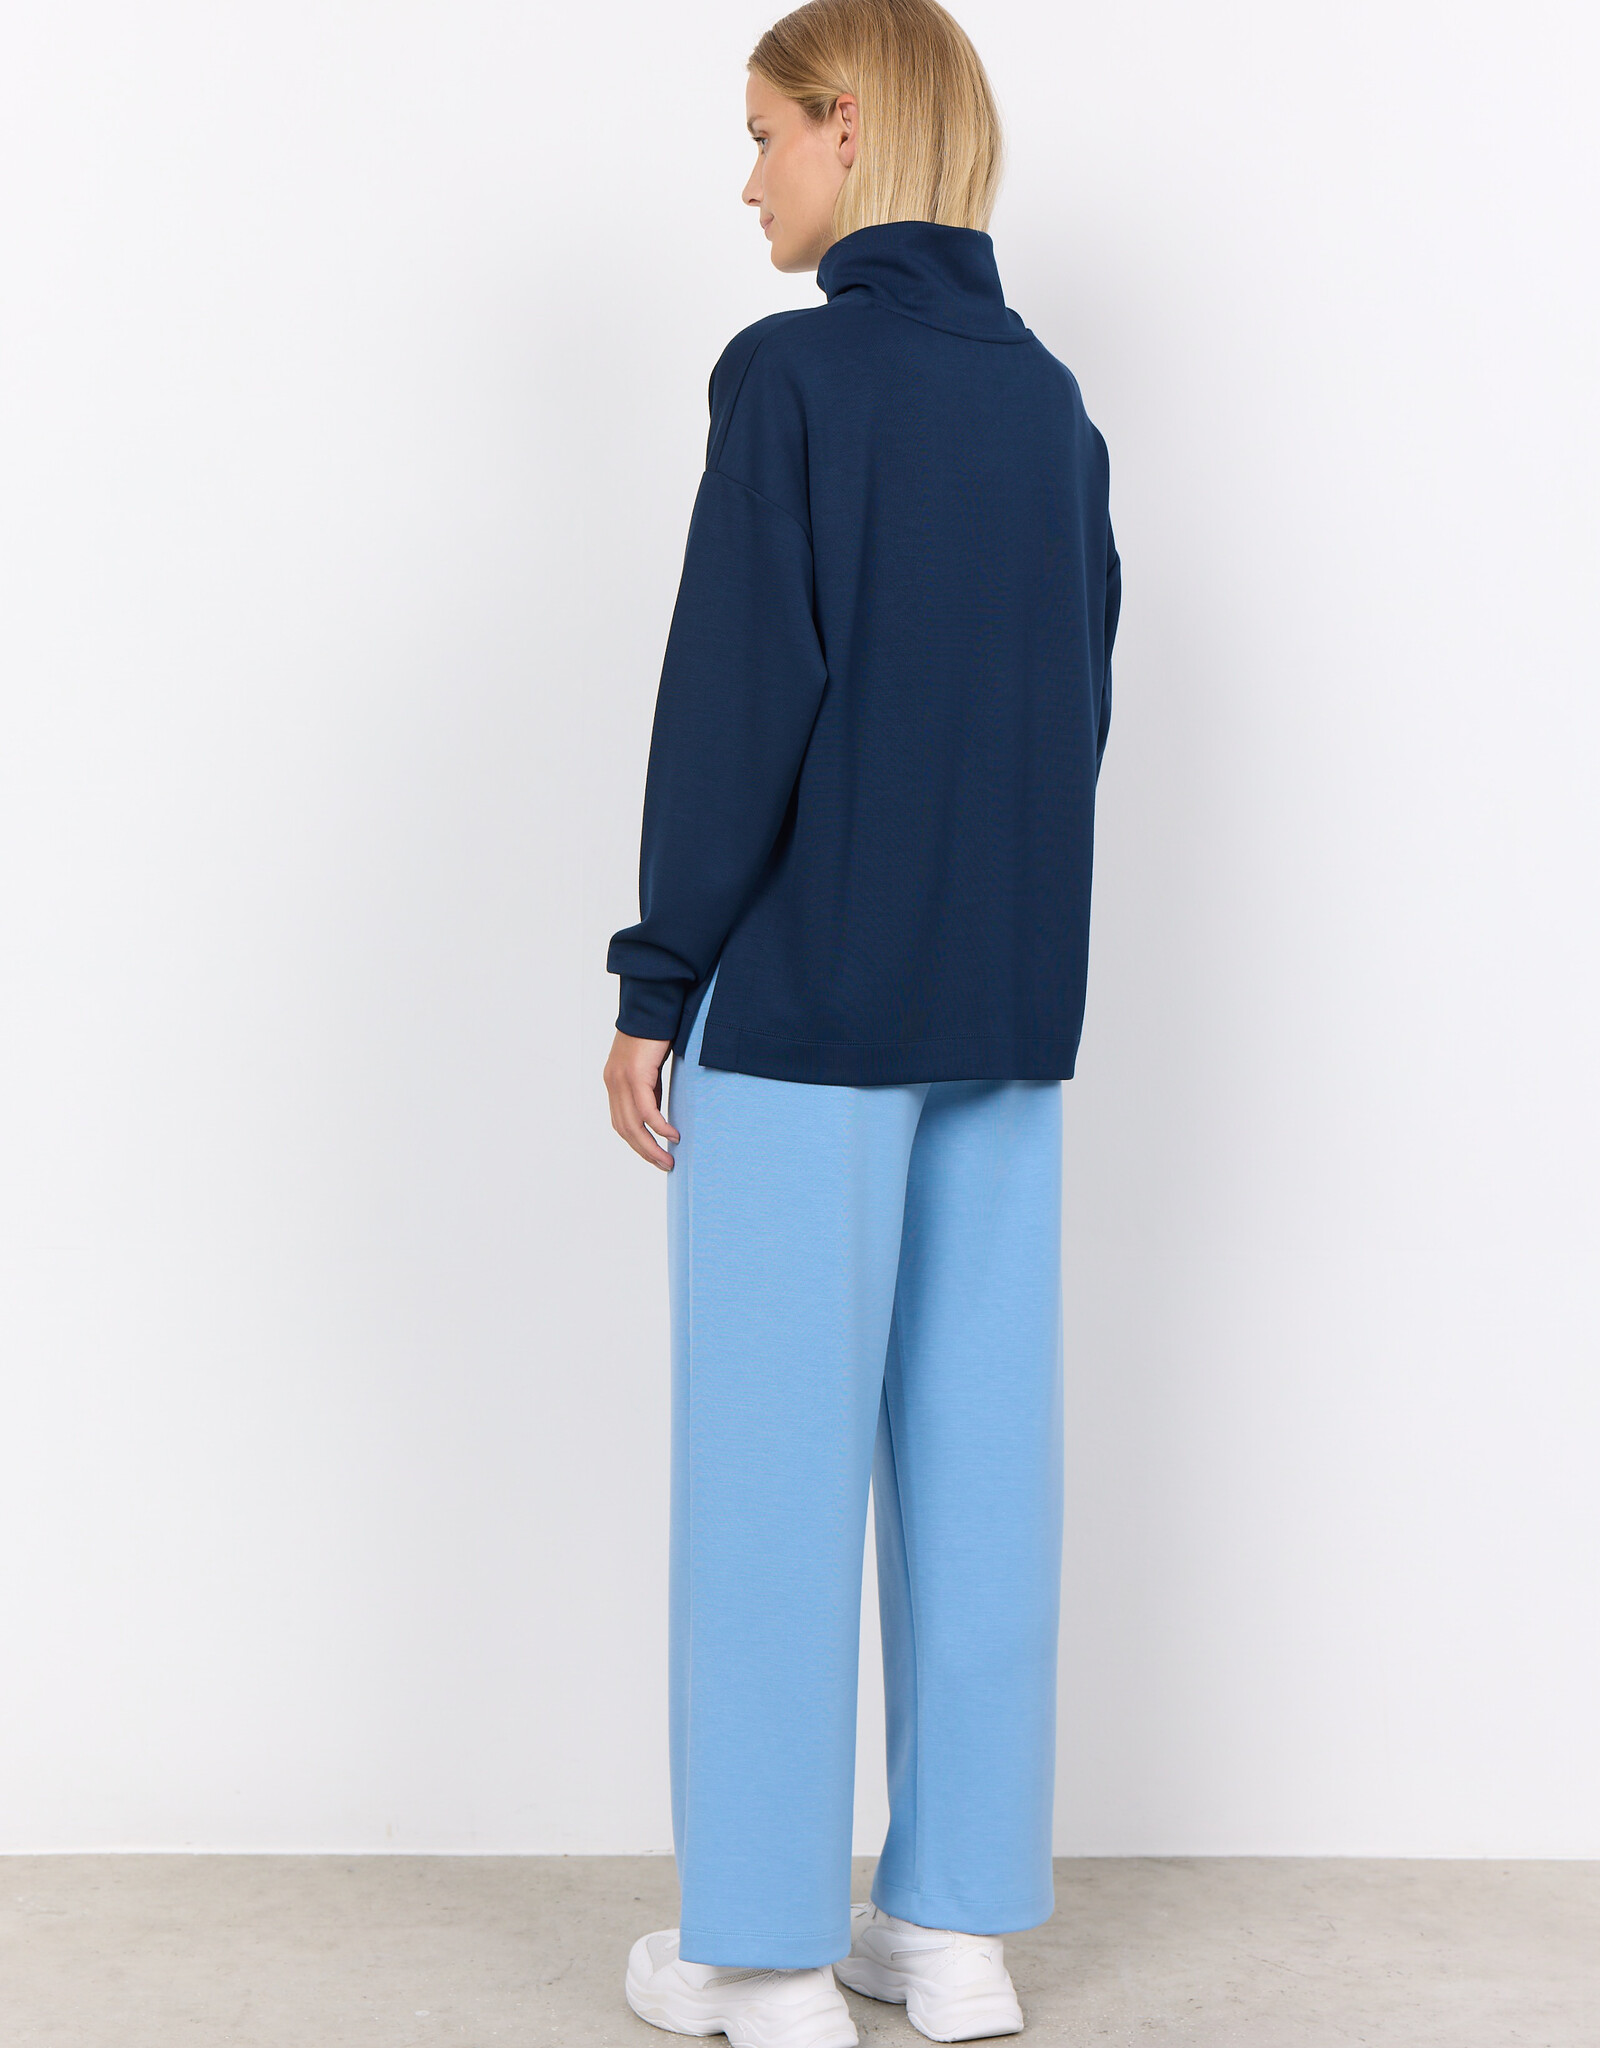 Soya Concept Soya Concept - SS24 26427 Zip Cardigan (2 colours)